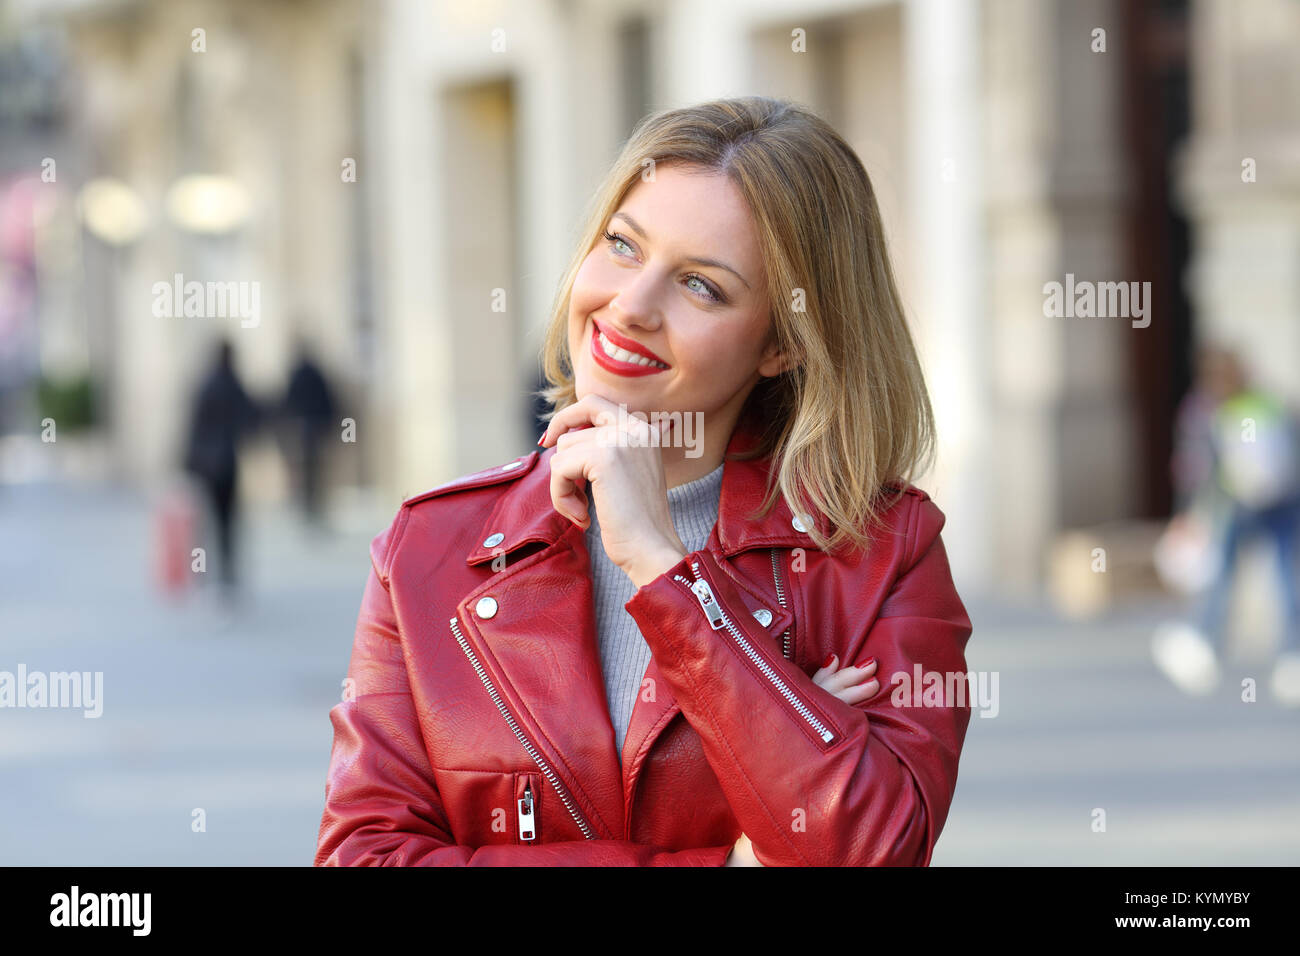 Front view portrait of a pensive girl looking at side on the street Stock Photo